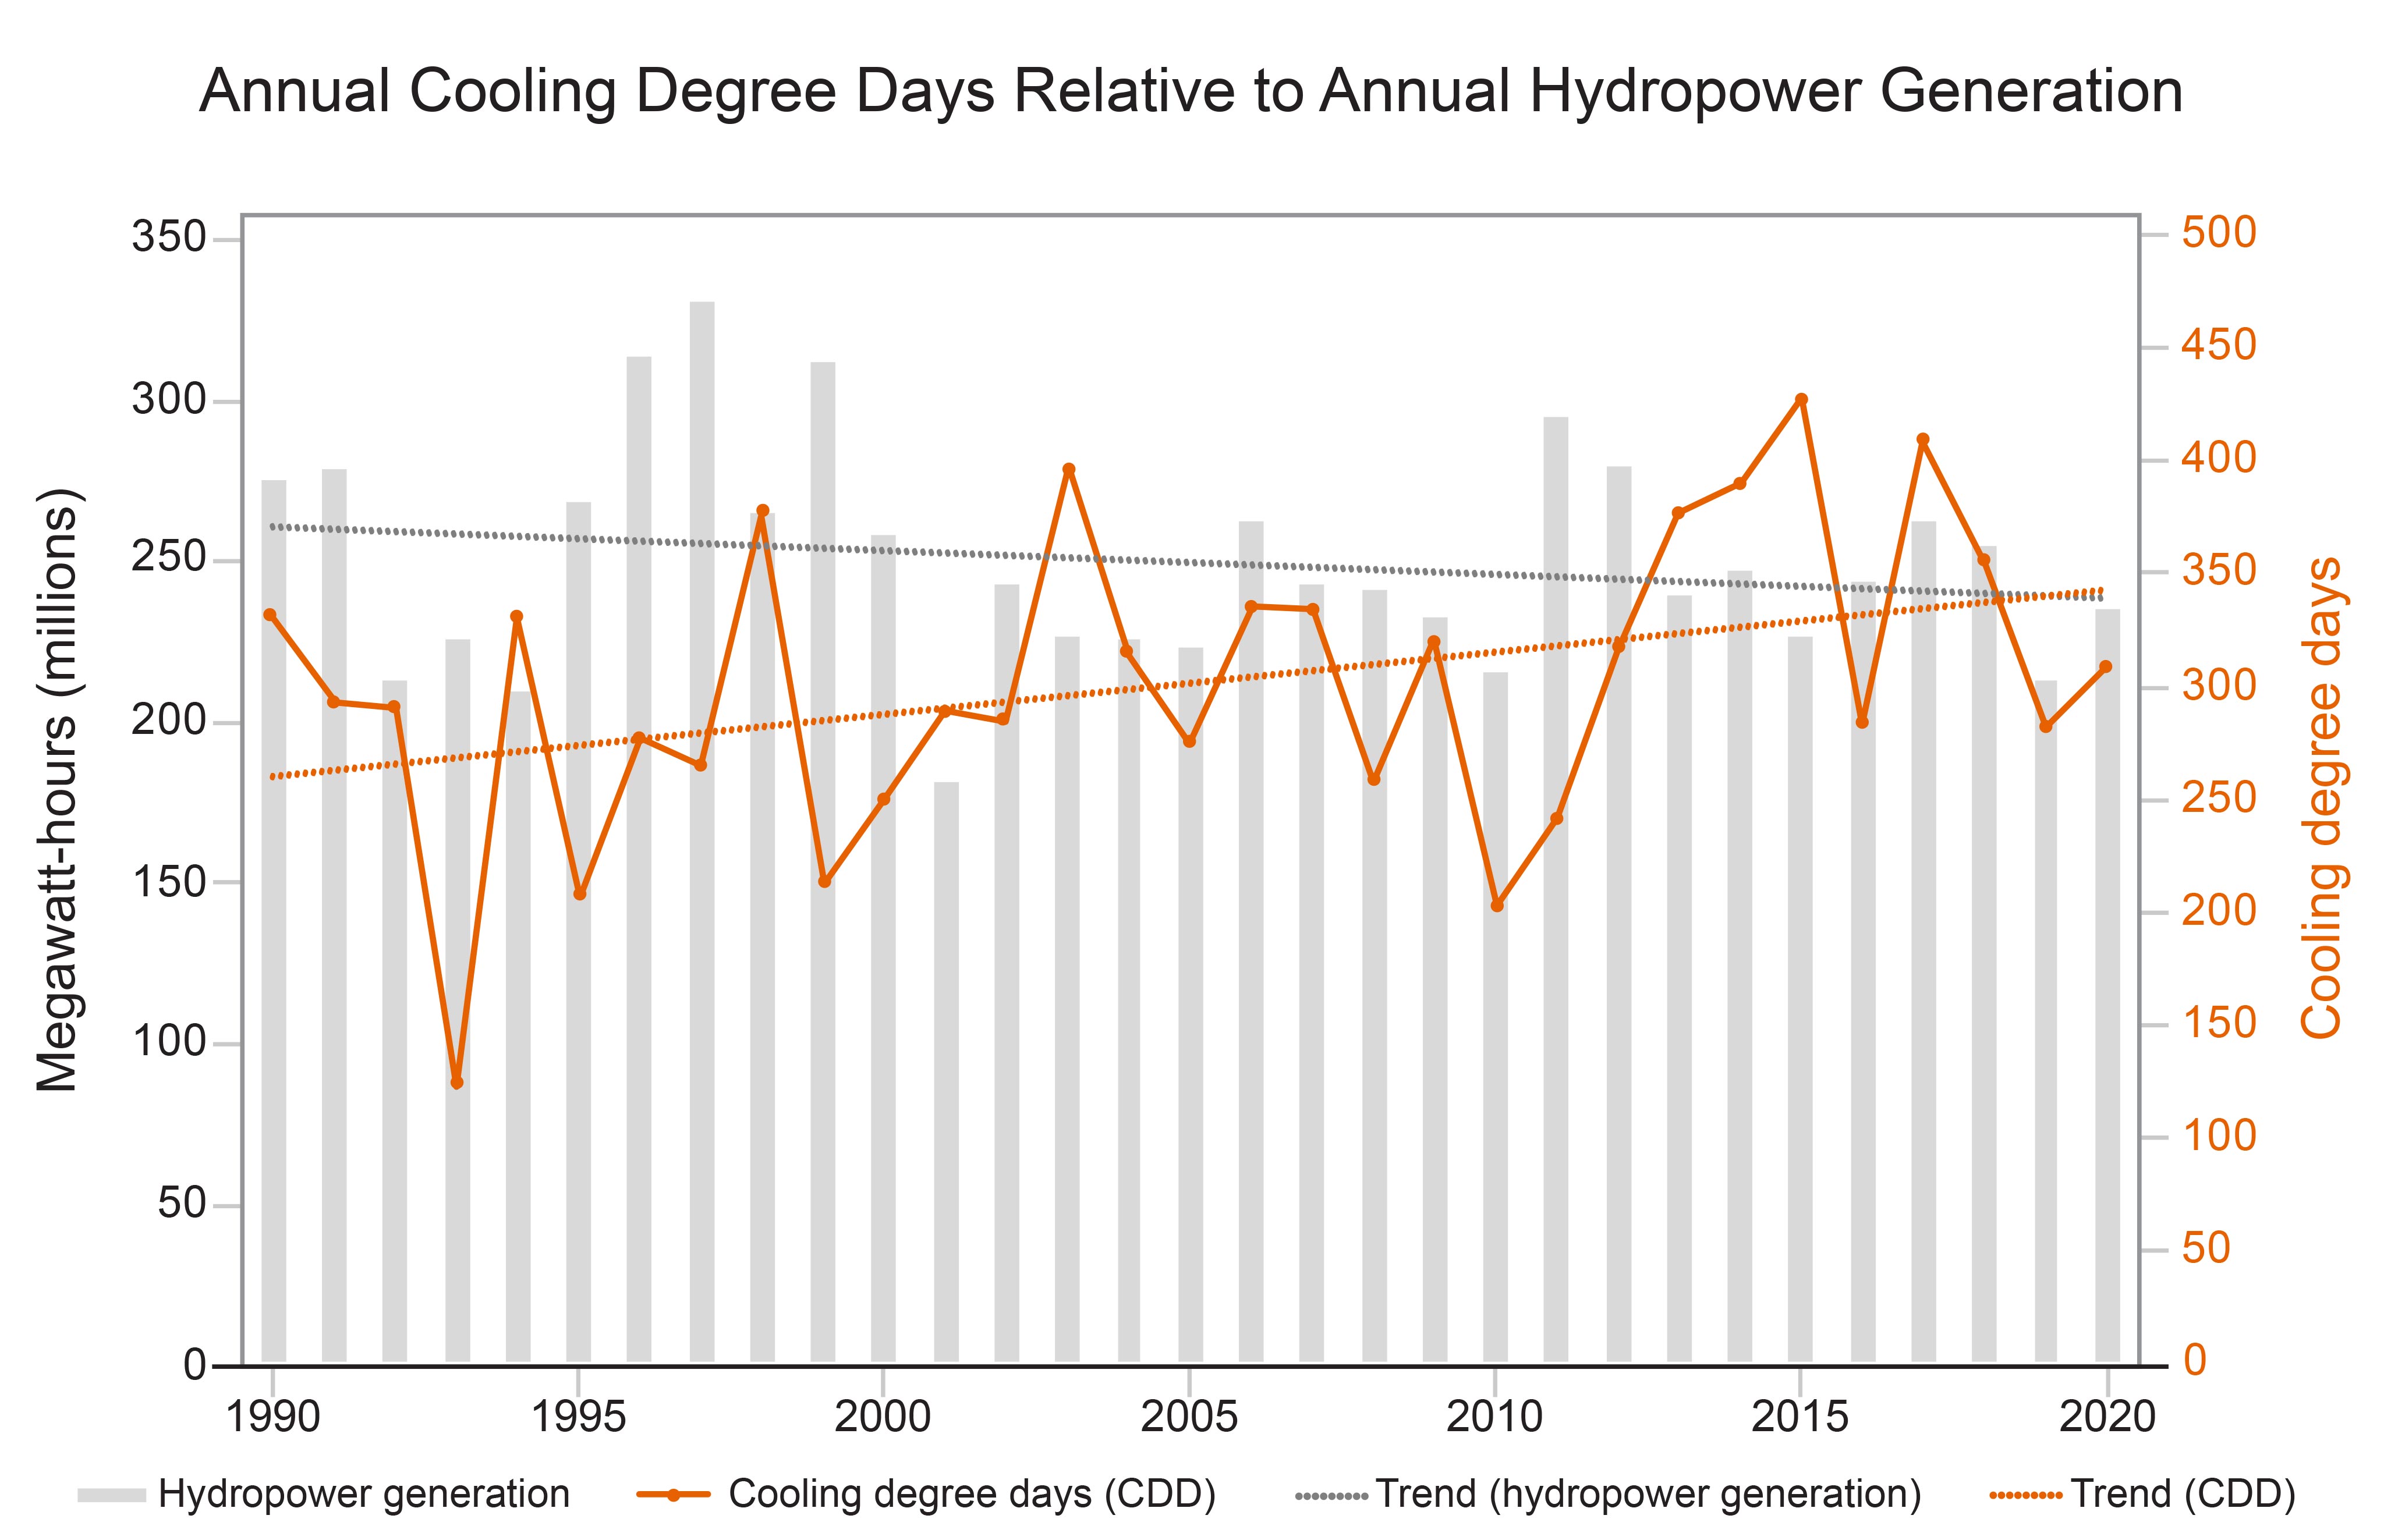 Annual Cooling Degree Days Relative to Annual Hydropower Generation